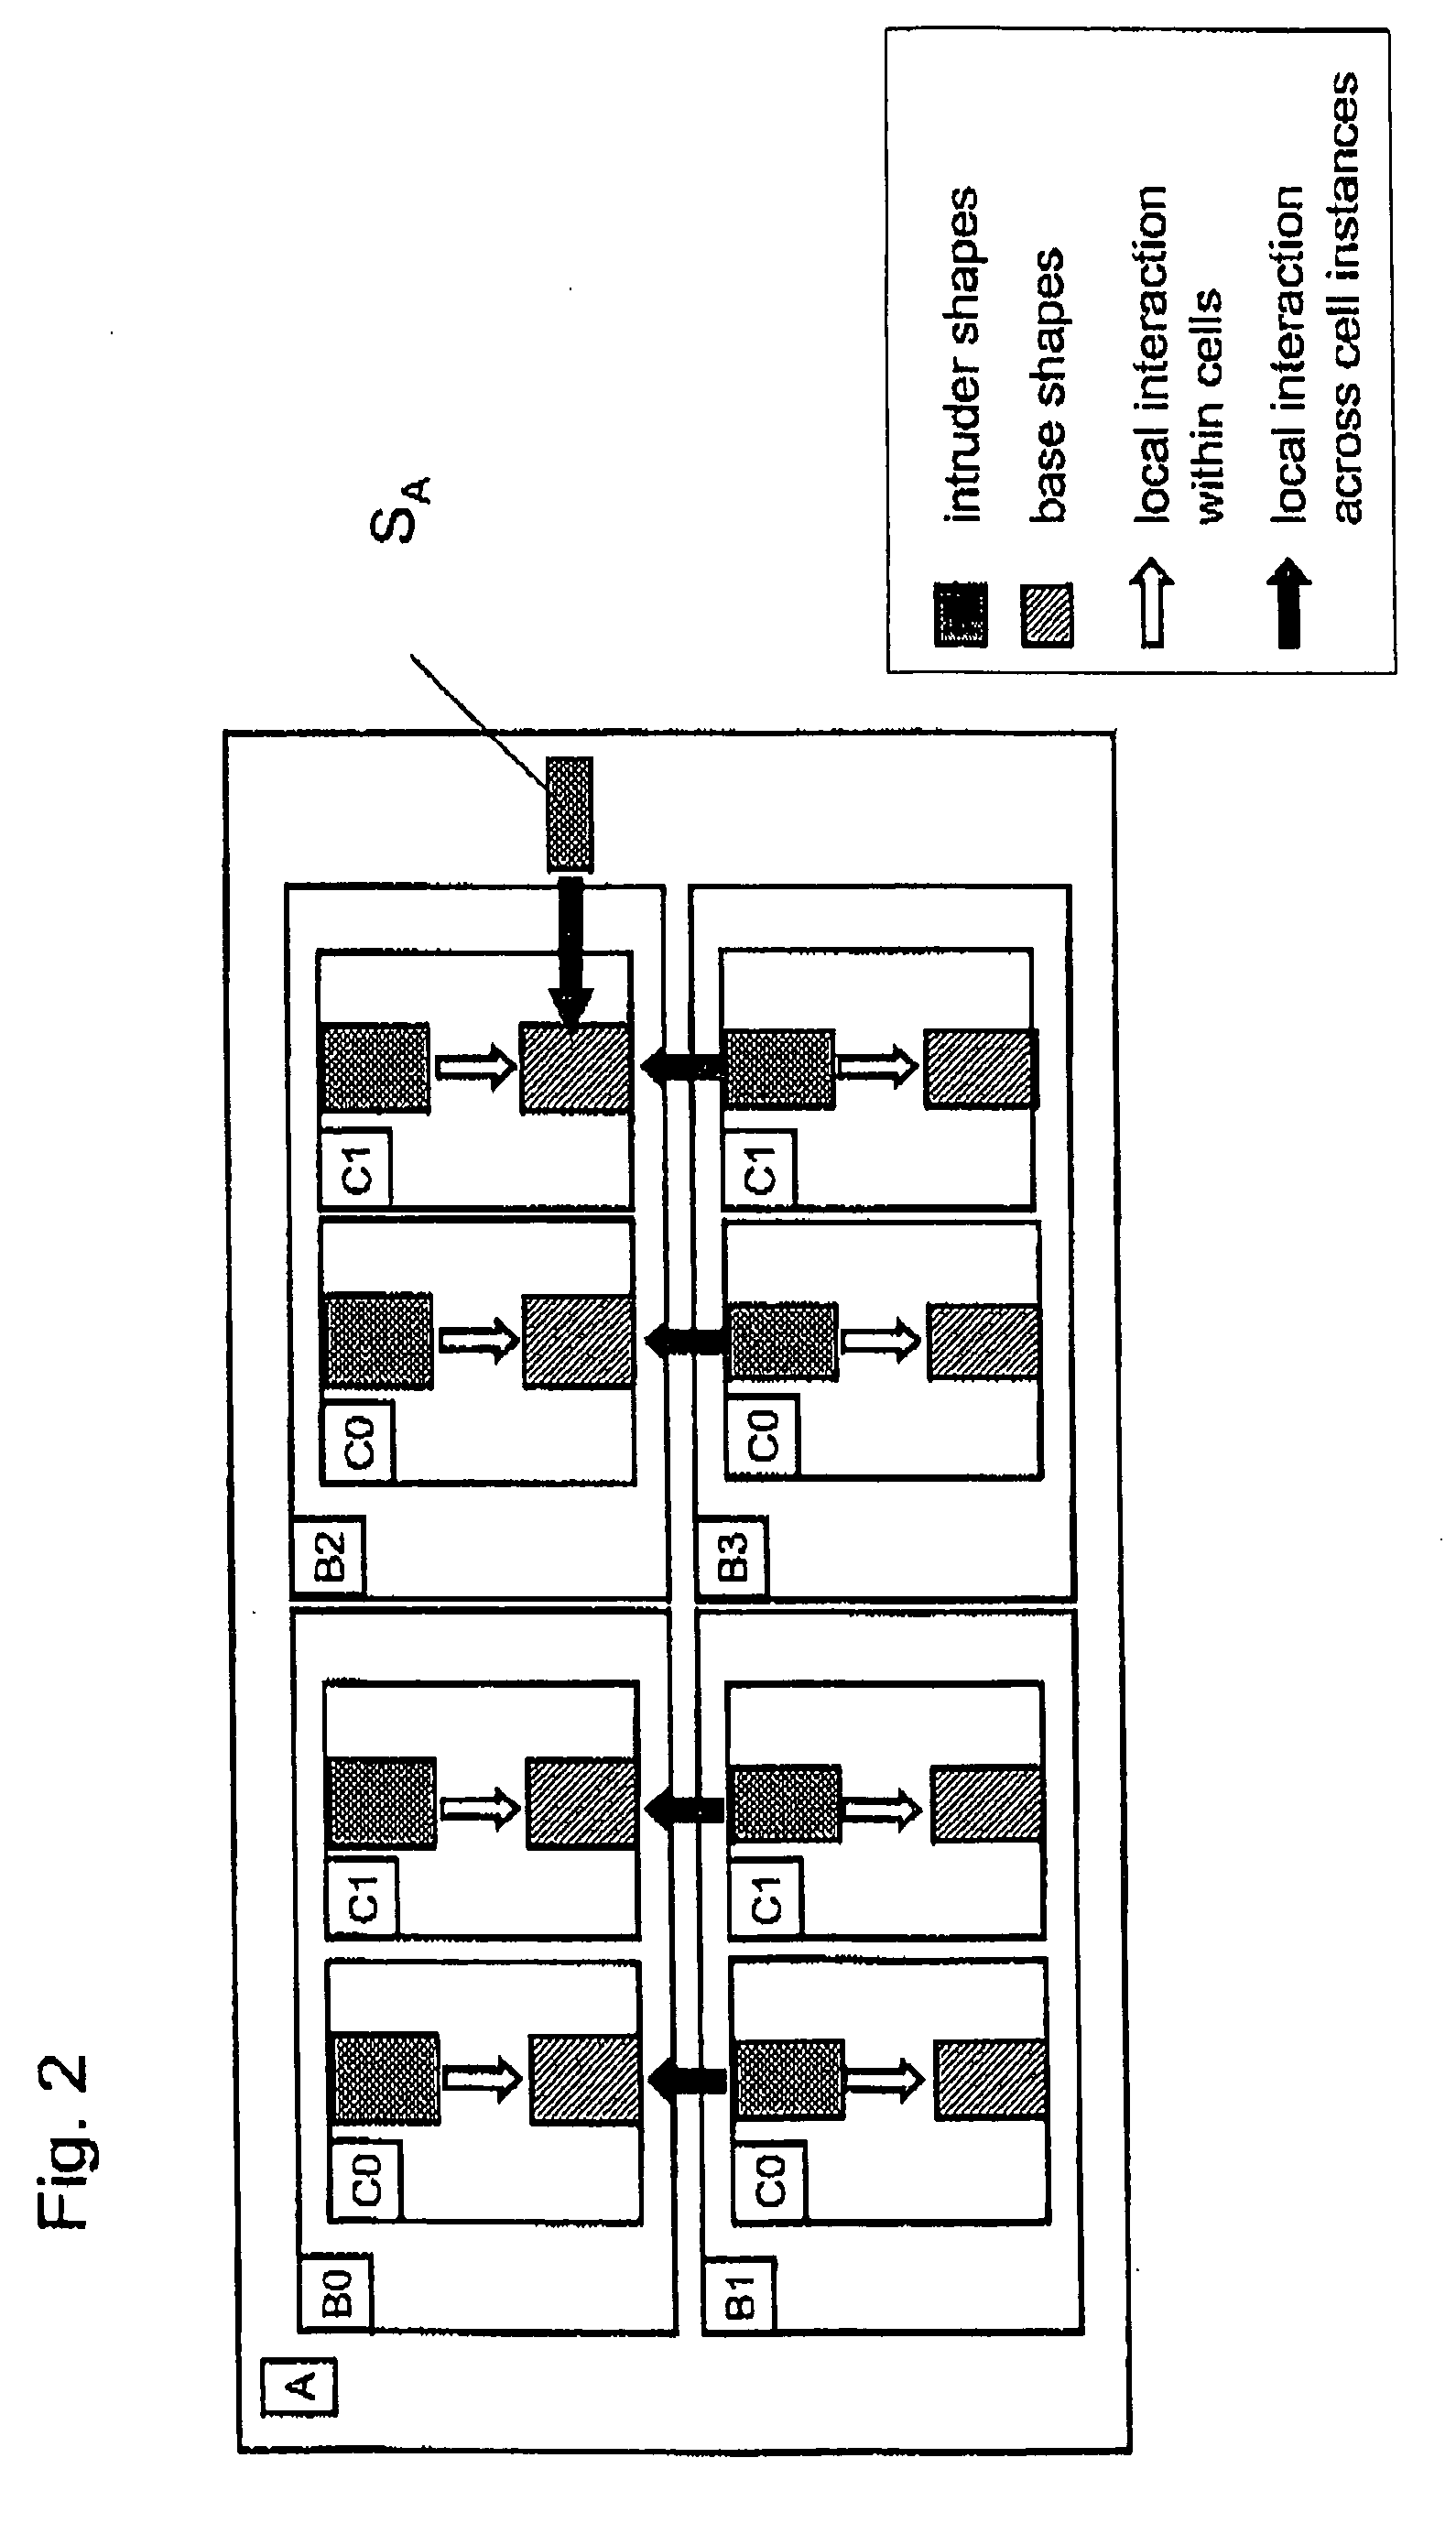 Method and system for performing local geometrical operation on a hierarchical layout of a semiconductor device